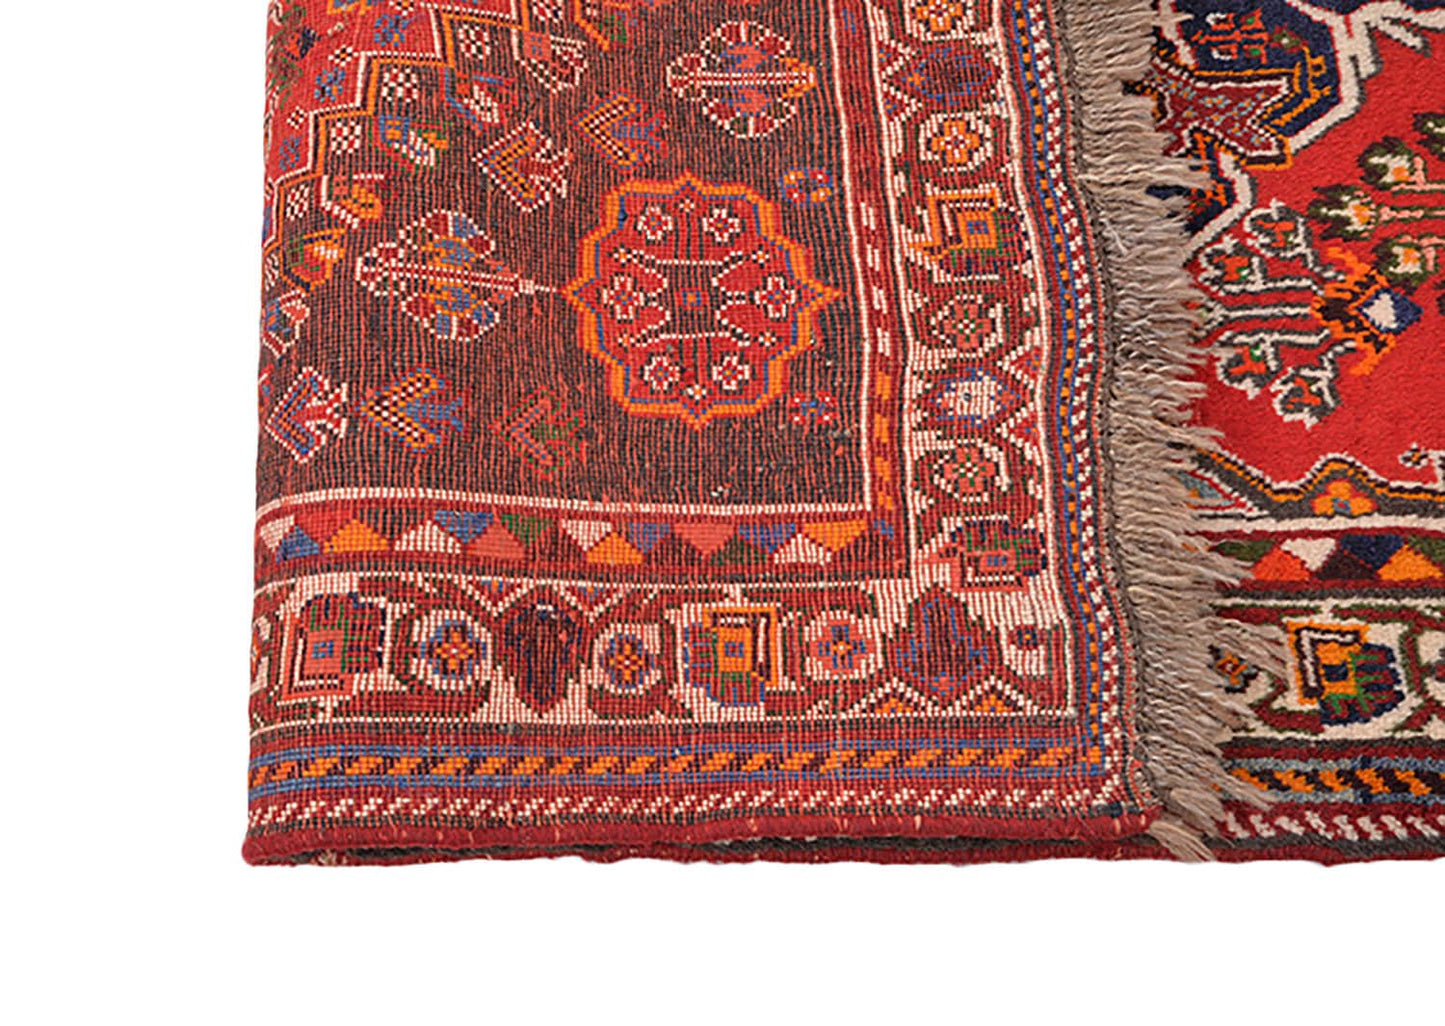 Red Bohemian 4 x 5 Rug  | Geometric Vintage Wool Rug | Tribal Persian Hand Knotted Bright Medallion Rug